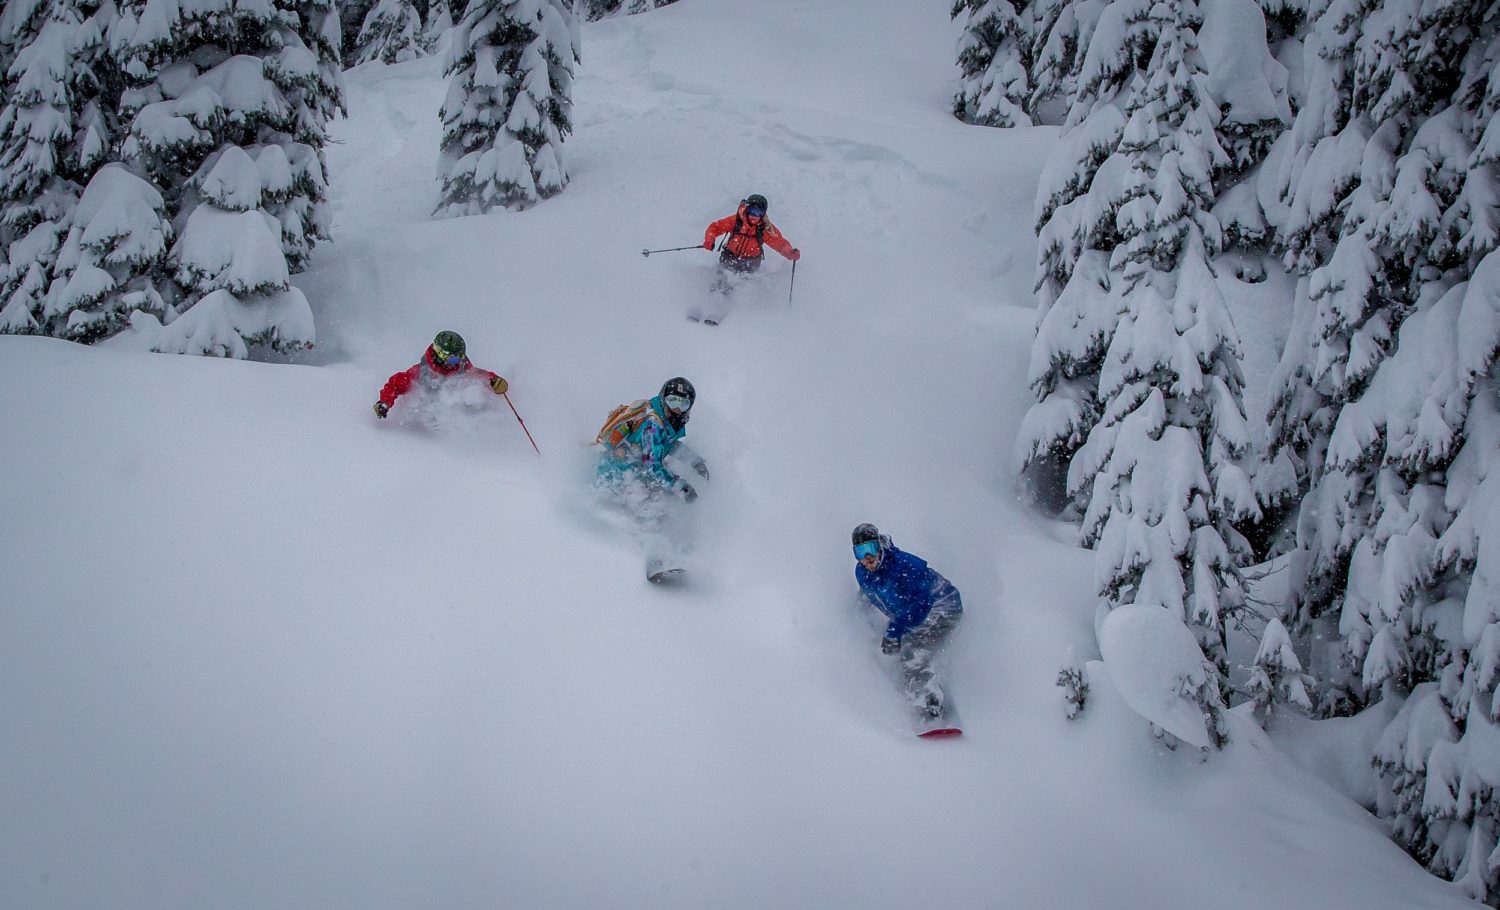 Snowboarders and Skiers finding face shots on the same run